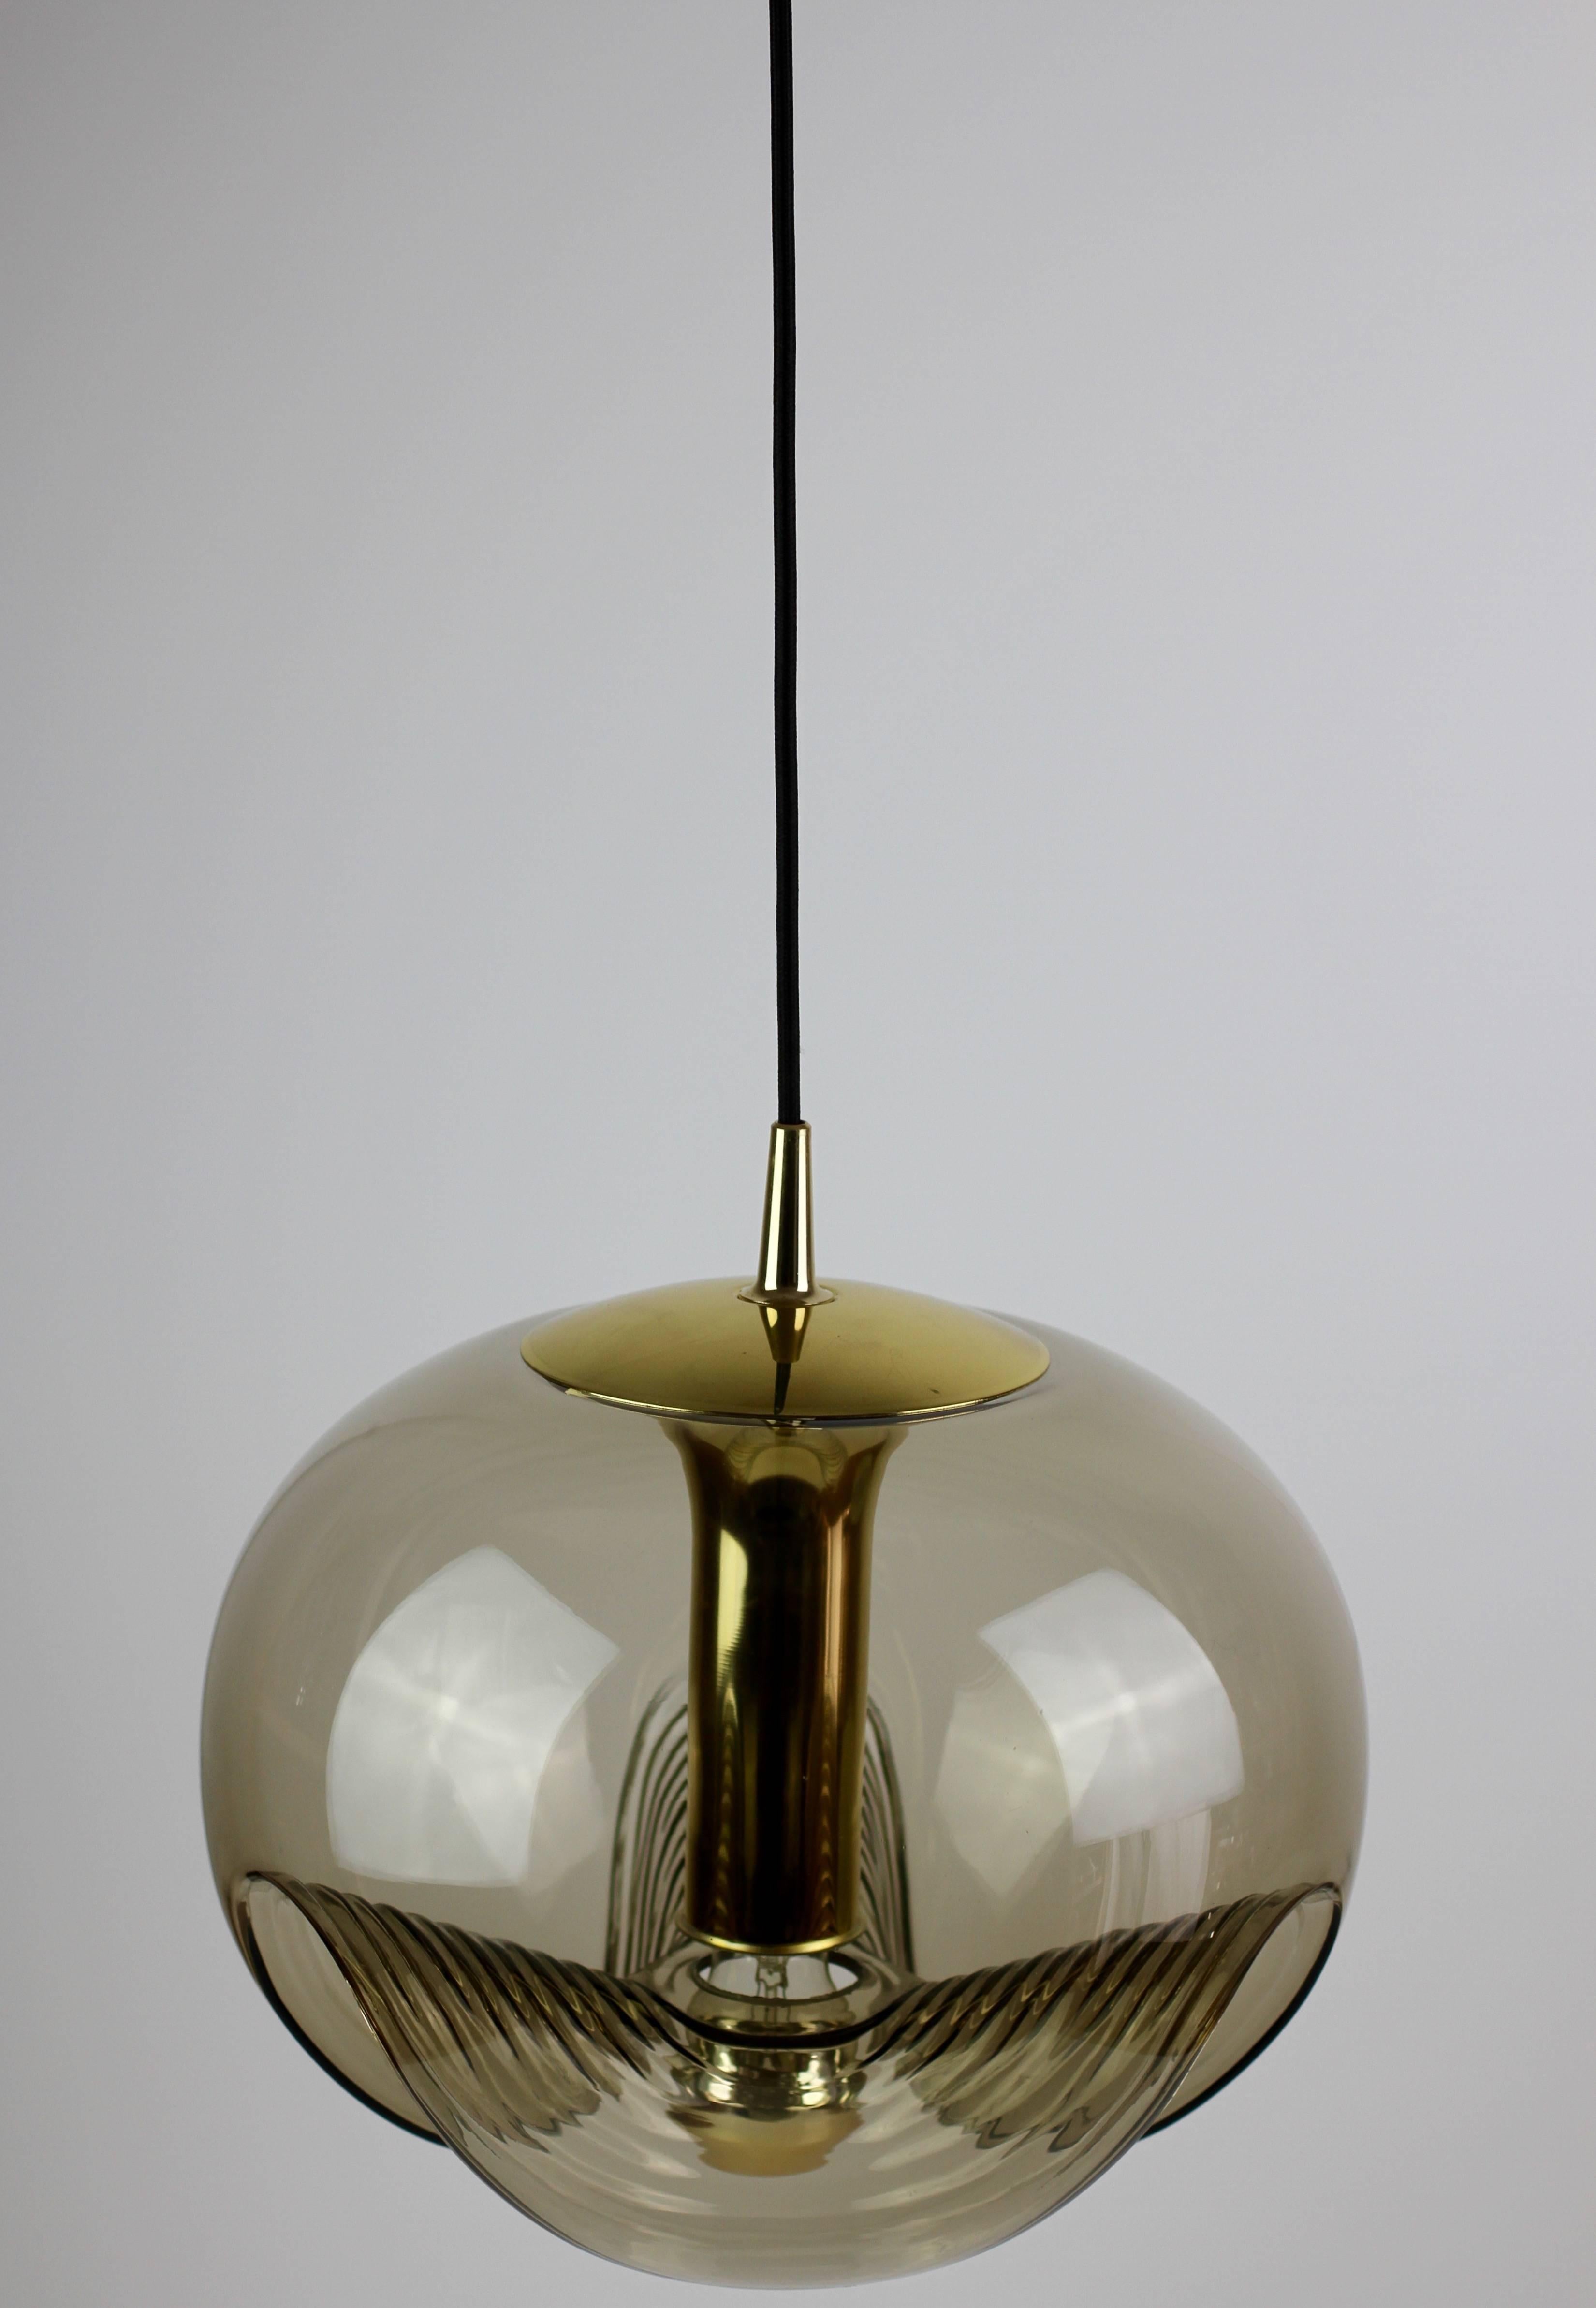 Beautiful midcentury design by Koch & Lowy for Peill & Putzler in the 1970s. This is an absolutely classic piece of design, featuring a smoked colored (colored) glass globe shade with a waved/ribbed moulded bubble form, casting a beautiful